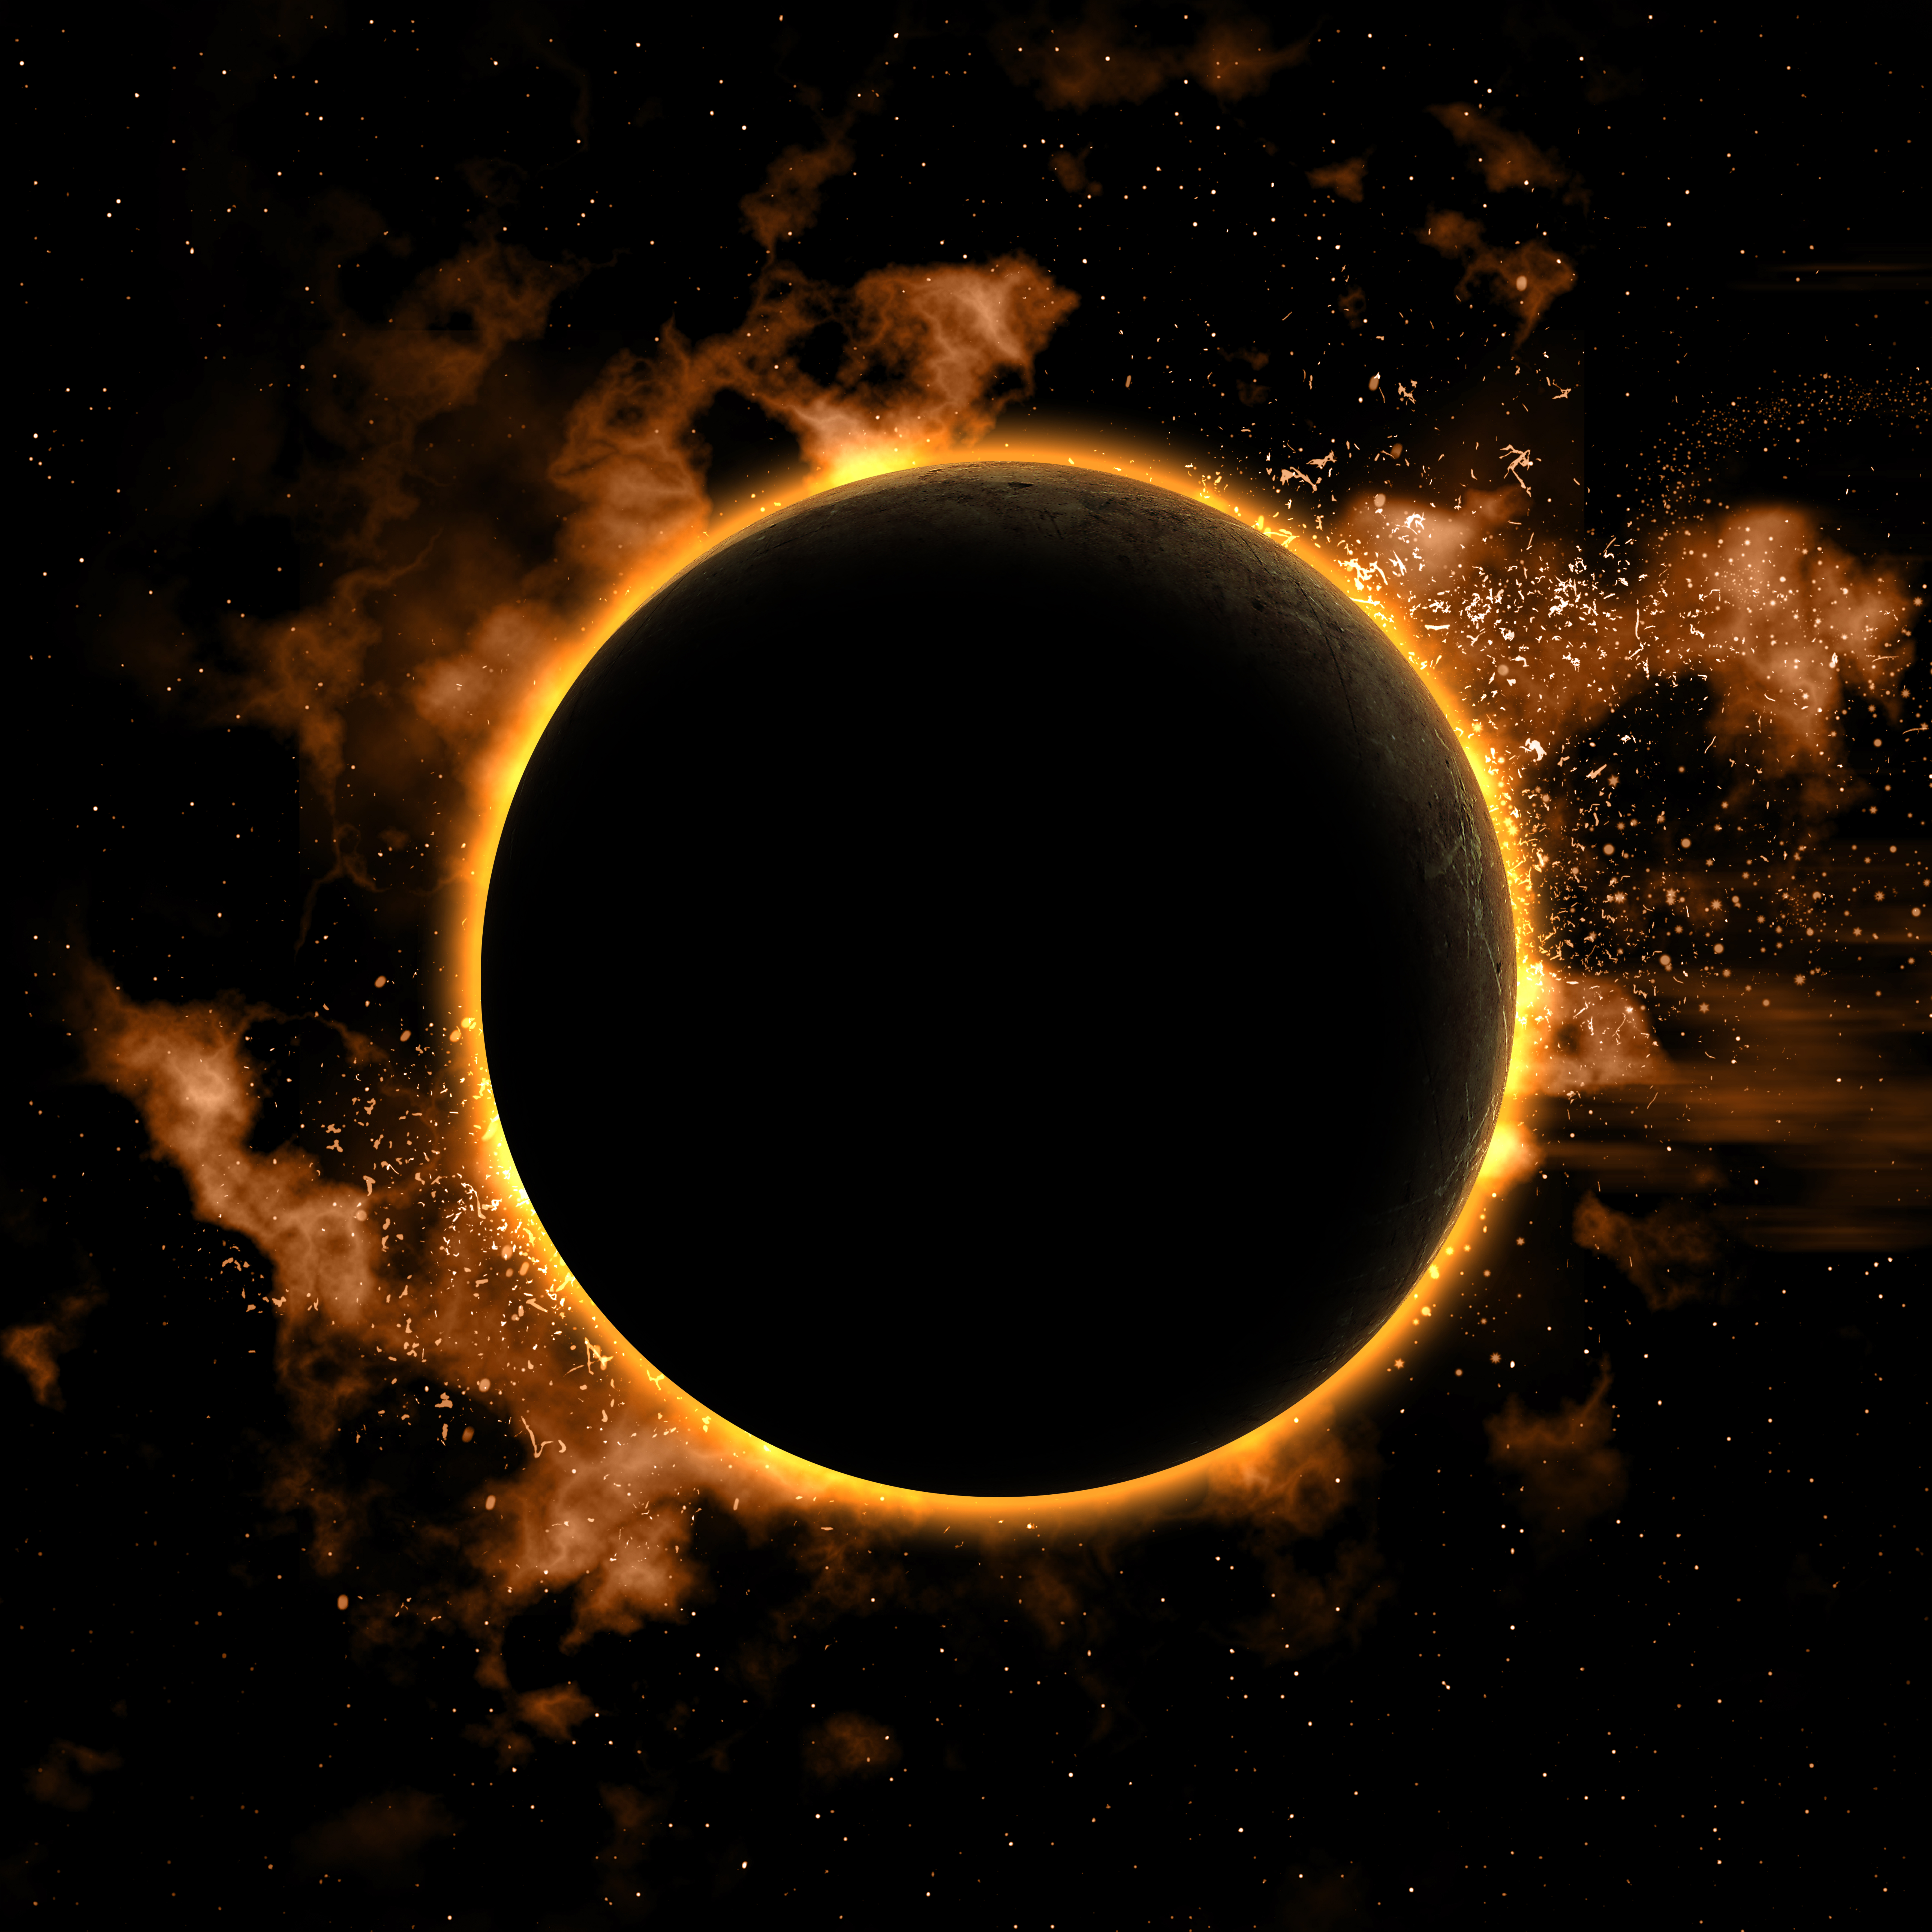 Eclipse with the Ring of Fire